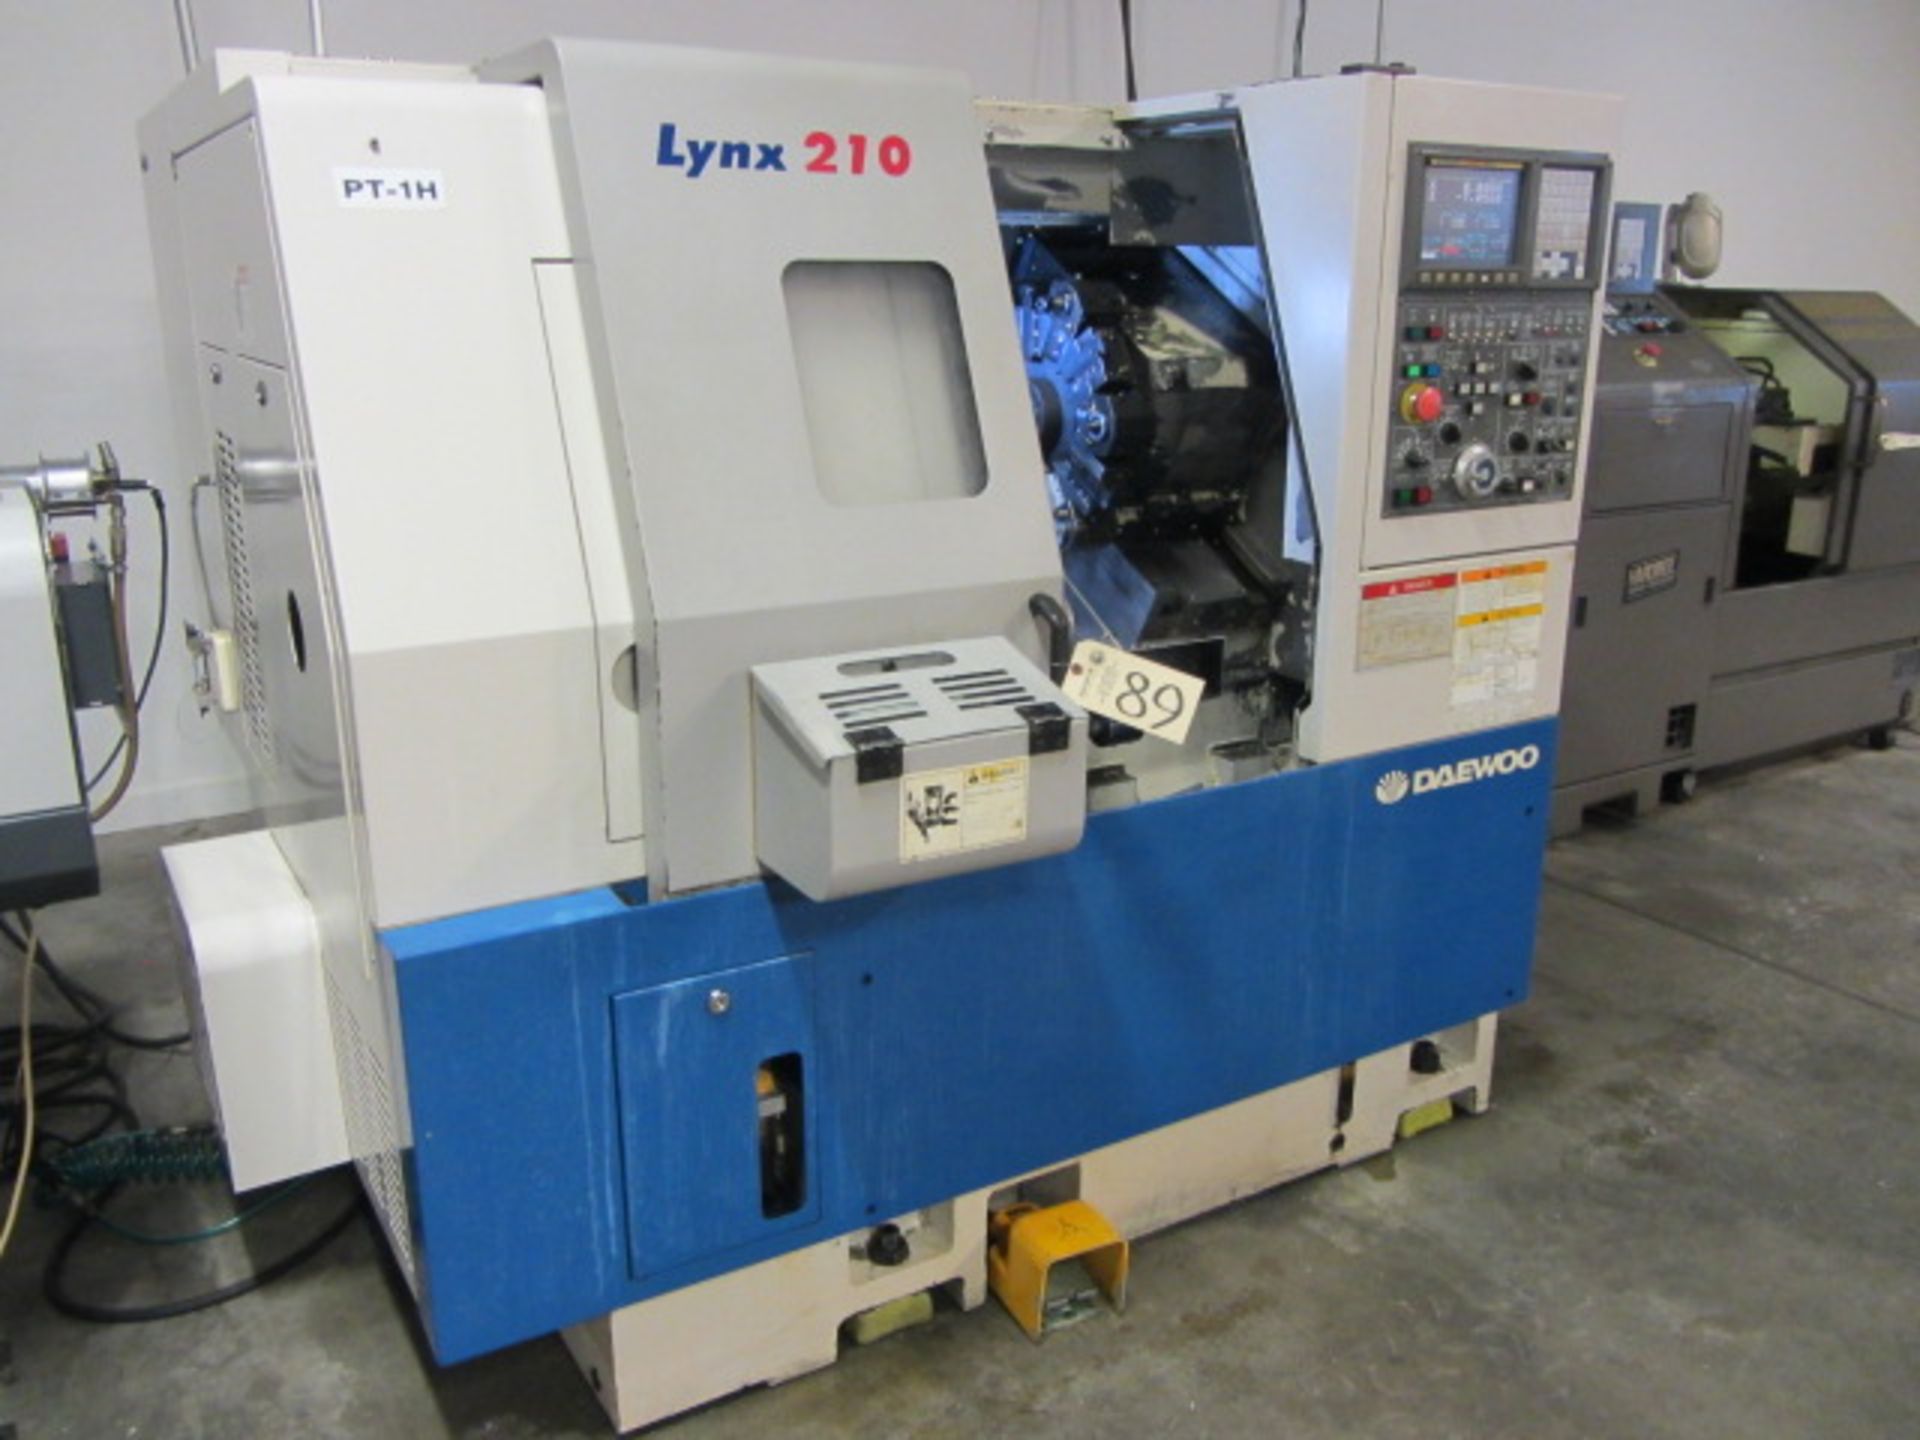 Daewoo Lynx 210A CNC Turning Center with 16C Collet Chuck, Parts Catcher, Fanuc i CNC Control, sn: - Image 5 of 7